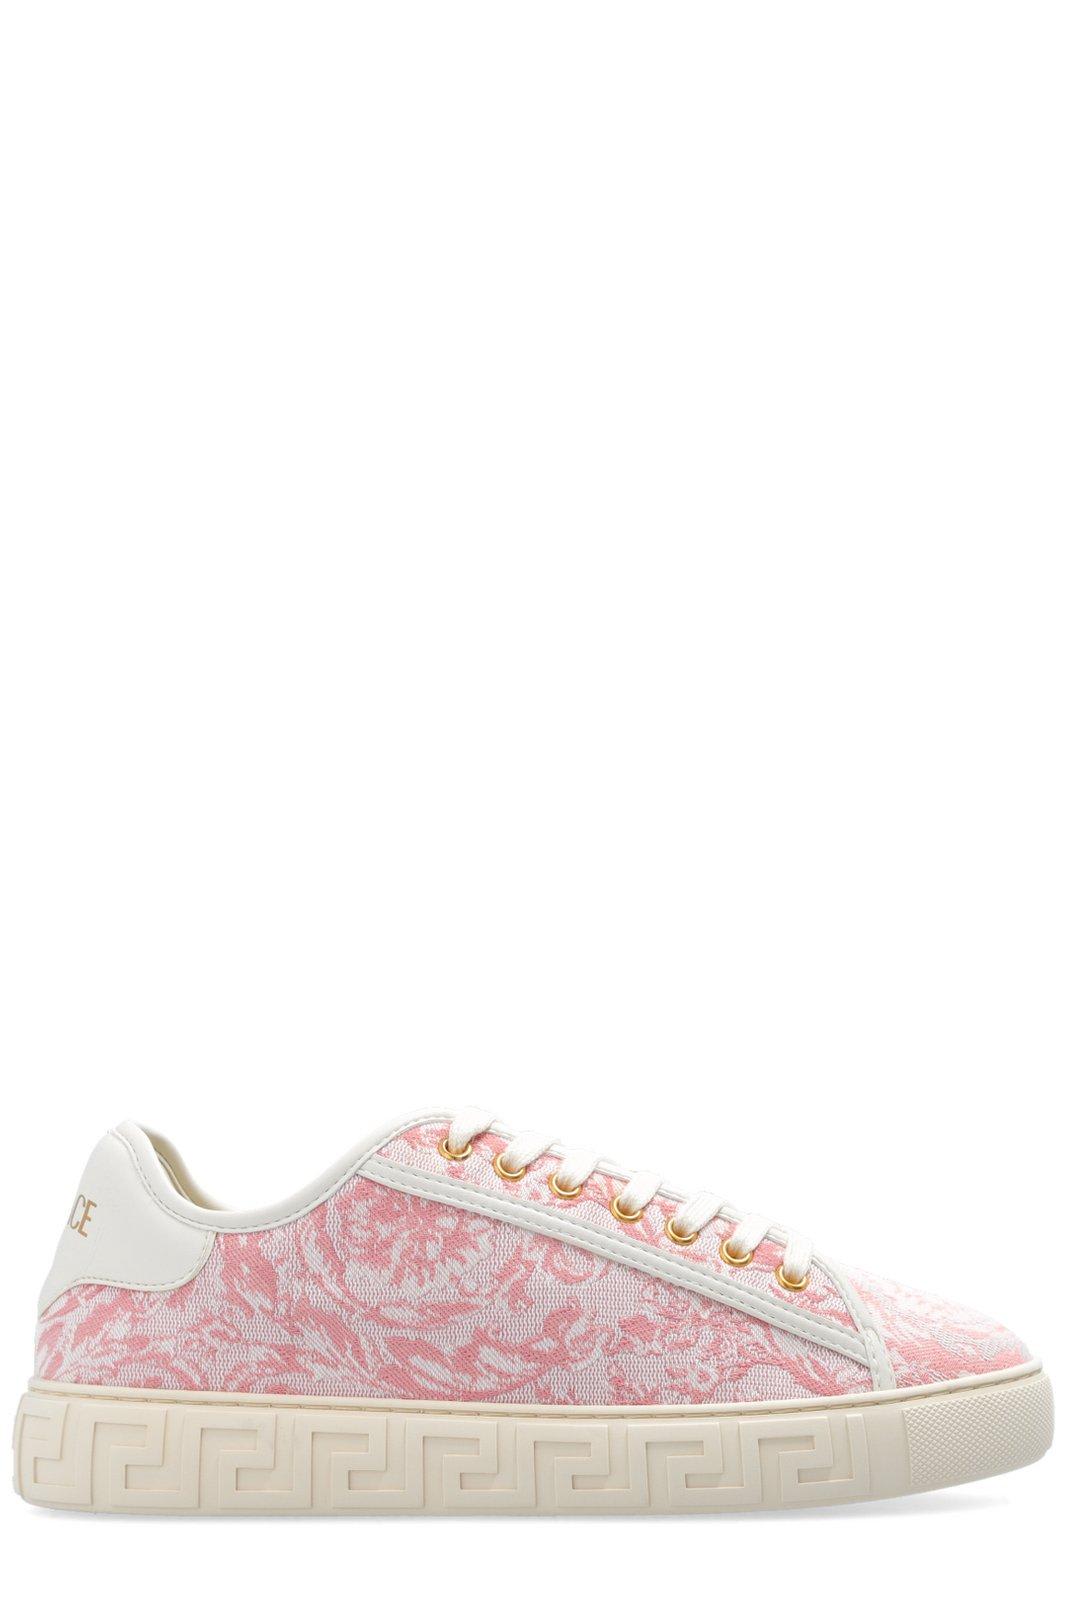 VERSACE BAROCCO GRECA LACE-UP trainers